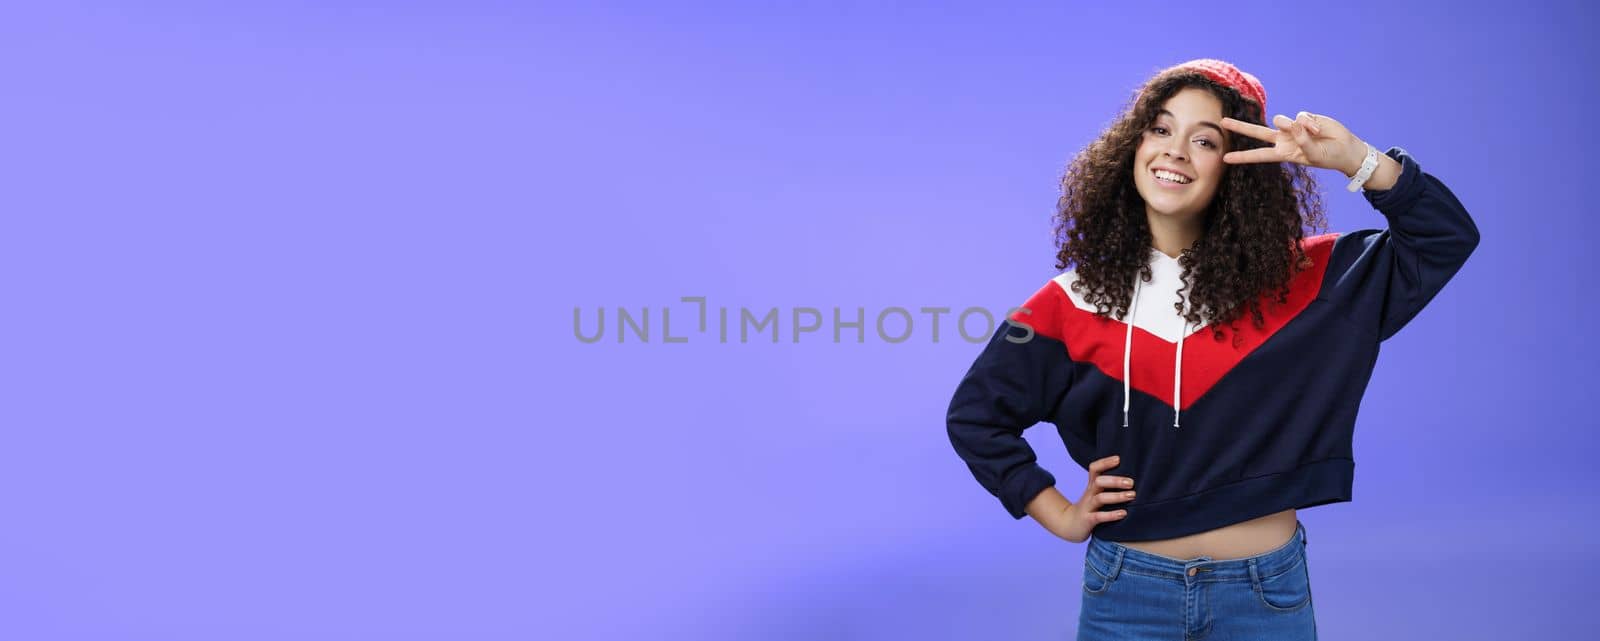 Attractive feminine woman with curly hairstyle in hat and sweatshirt showing peace or victory sign around eye and smiling carefree having fun playing in yard with snow over blue background by Benzoix